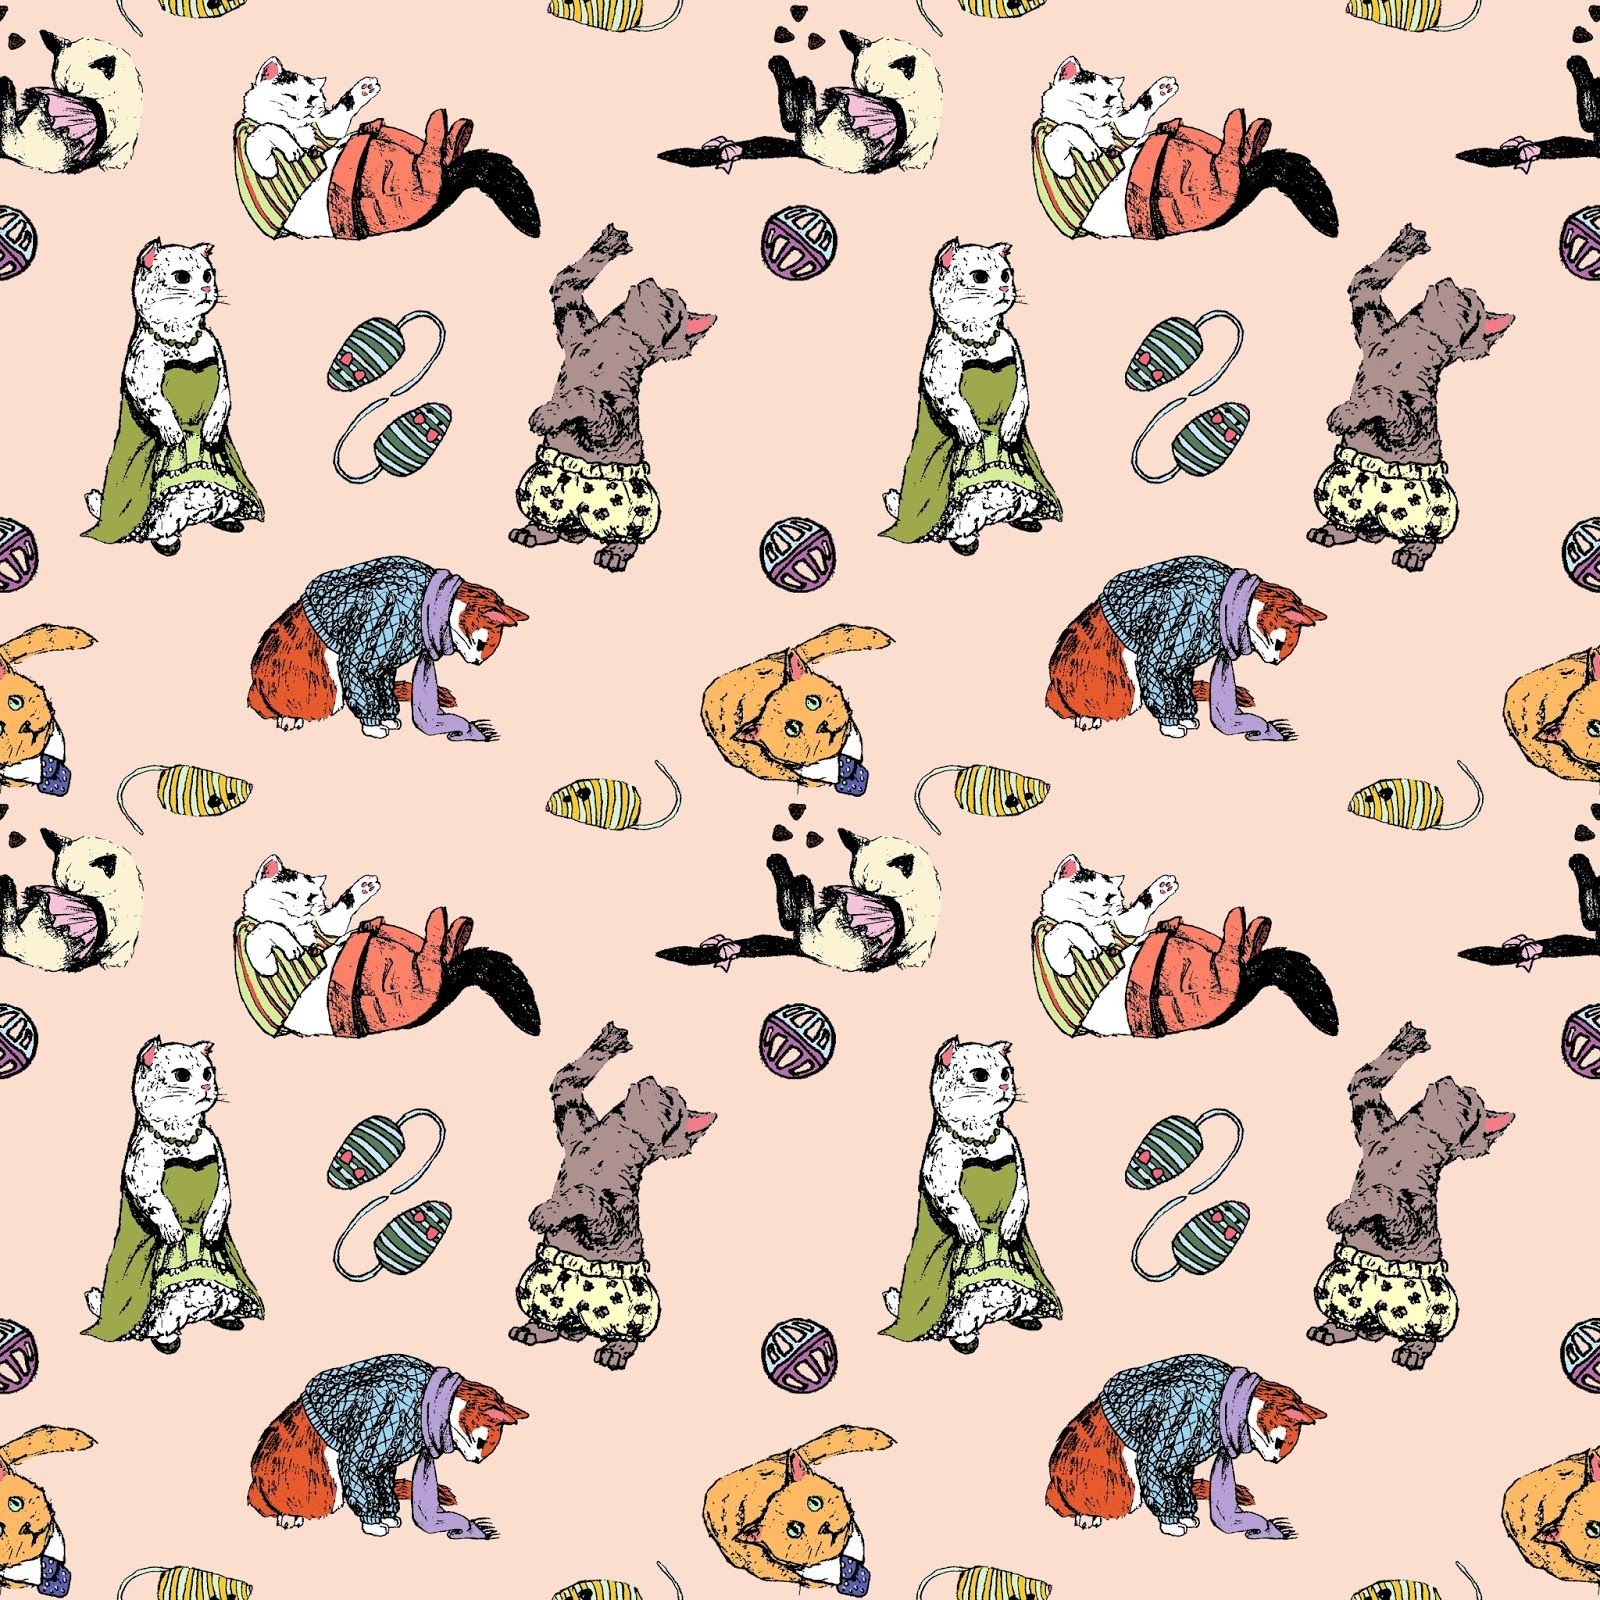 Free download Tumblr Cat Pattern Now i love drawing cats